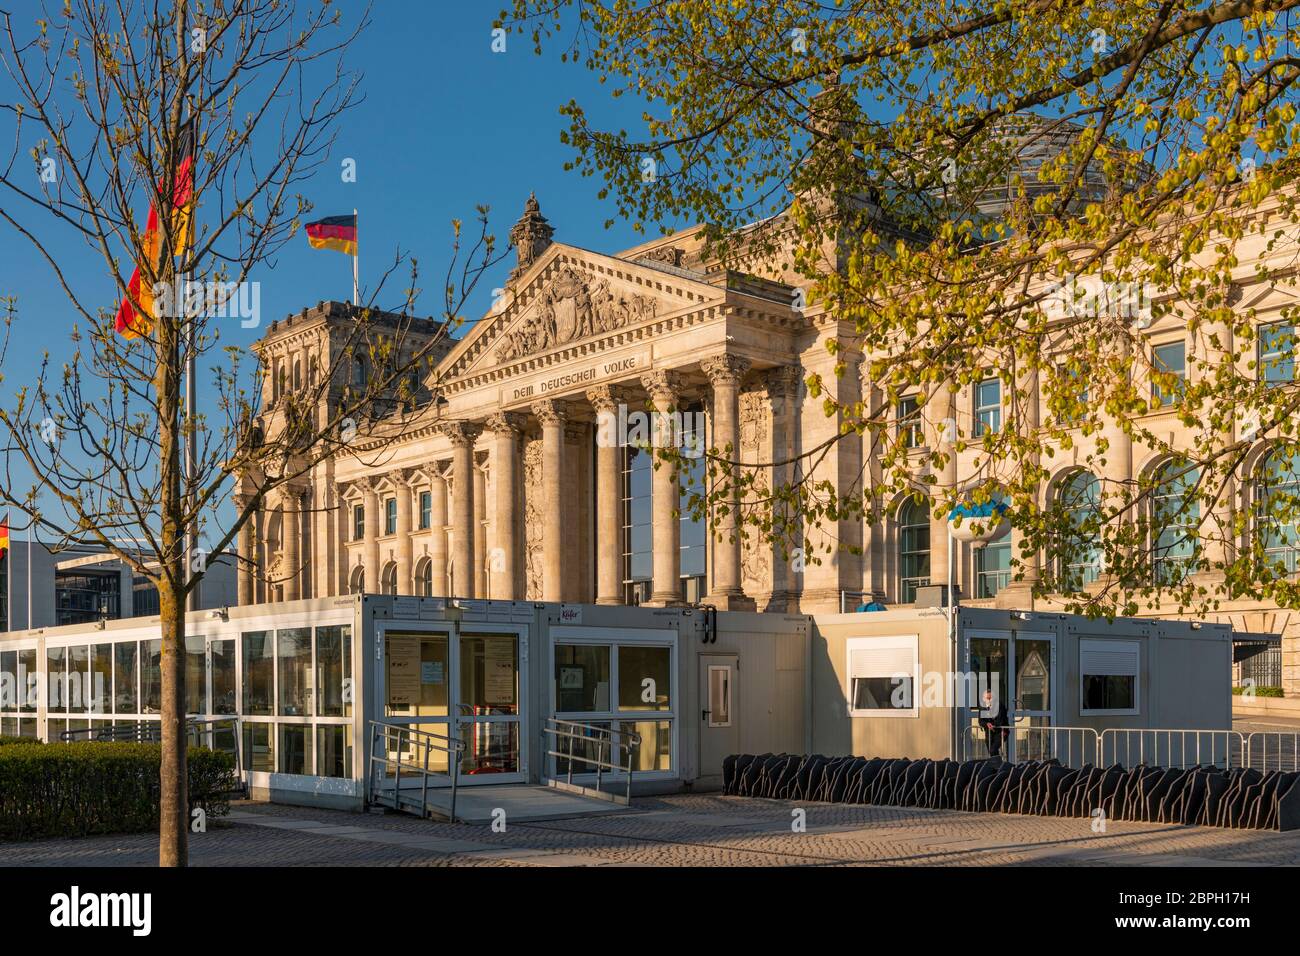 Reichstag  - German Parliament in Berlin, Germany. No visitors due to the corona pandemic. Stock Photo